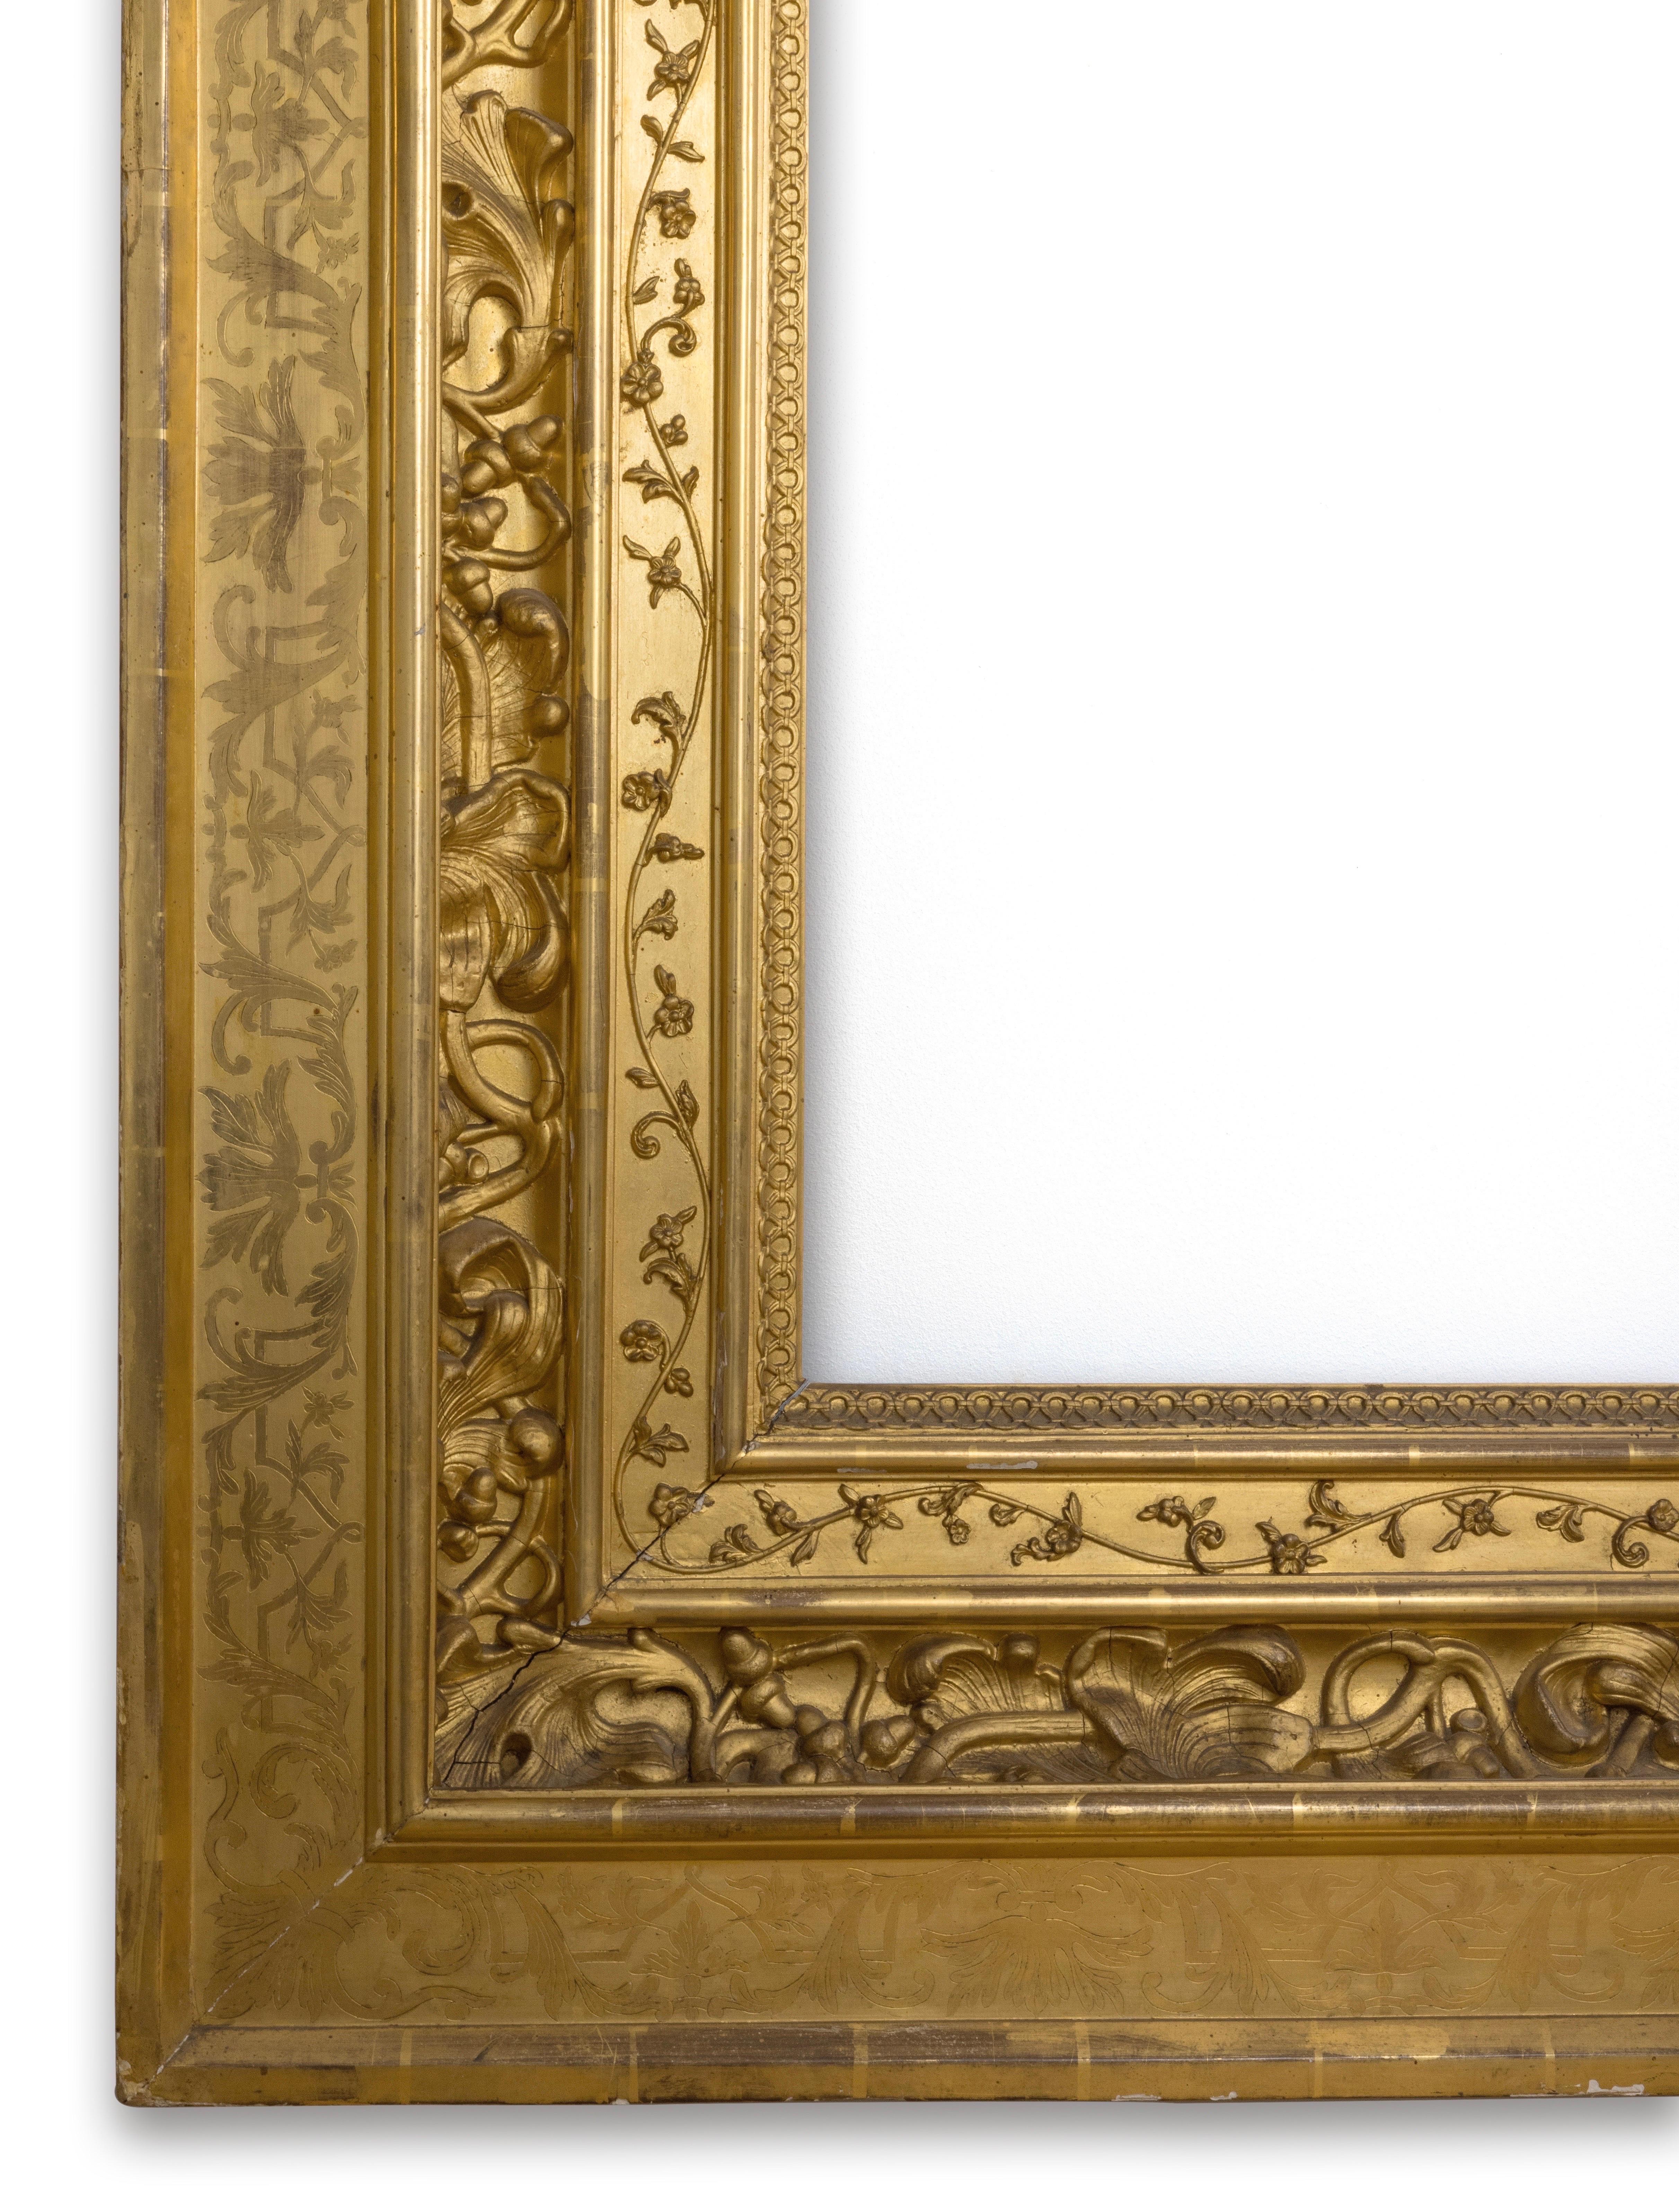 Wood Very Large Renaissance Revival Gilded French Frame 19th Century, Circa 1835 For Sale